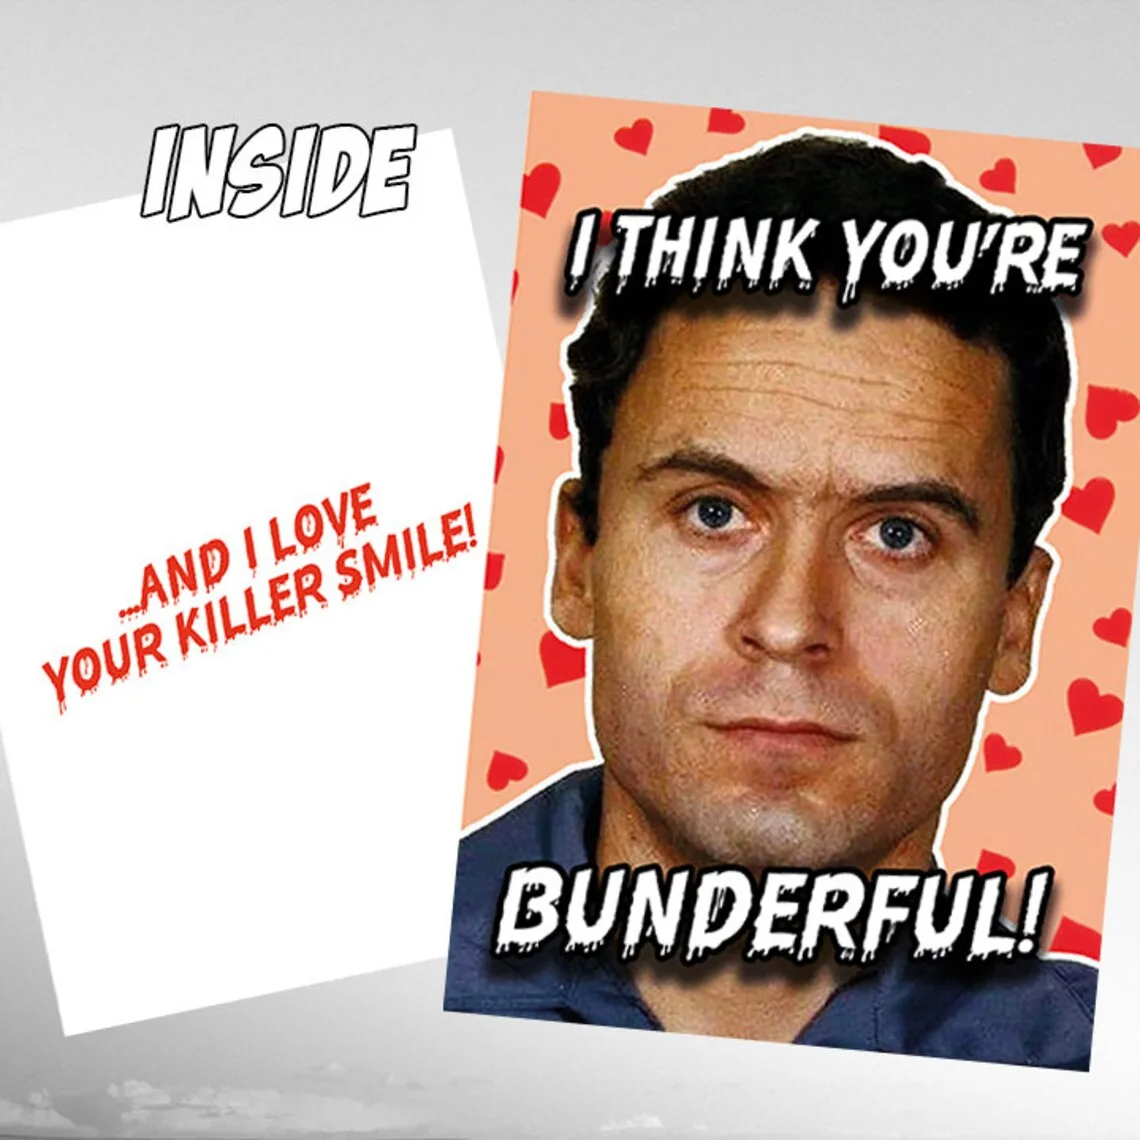 Sick Valentine's Day cards featuring serial killers Fred and Rose West are being sold online, featuring twisted messages and disturbing imagery.